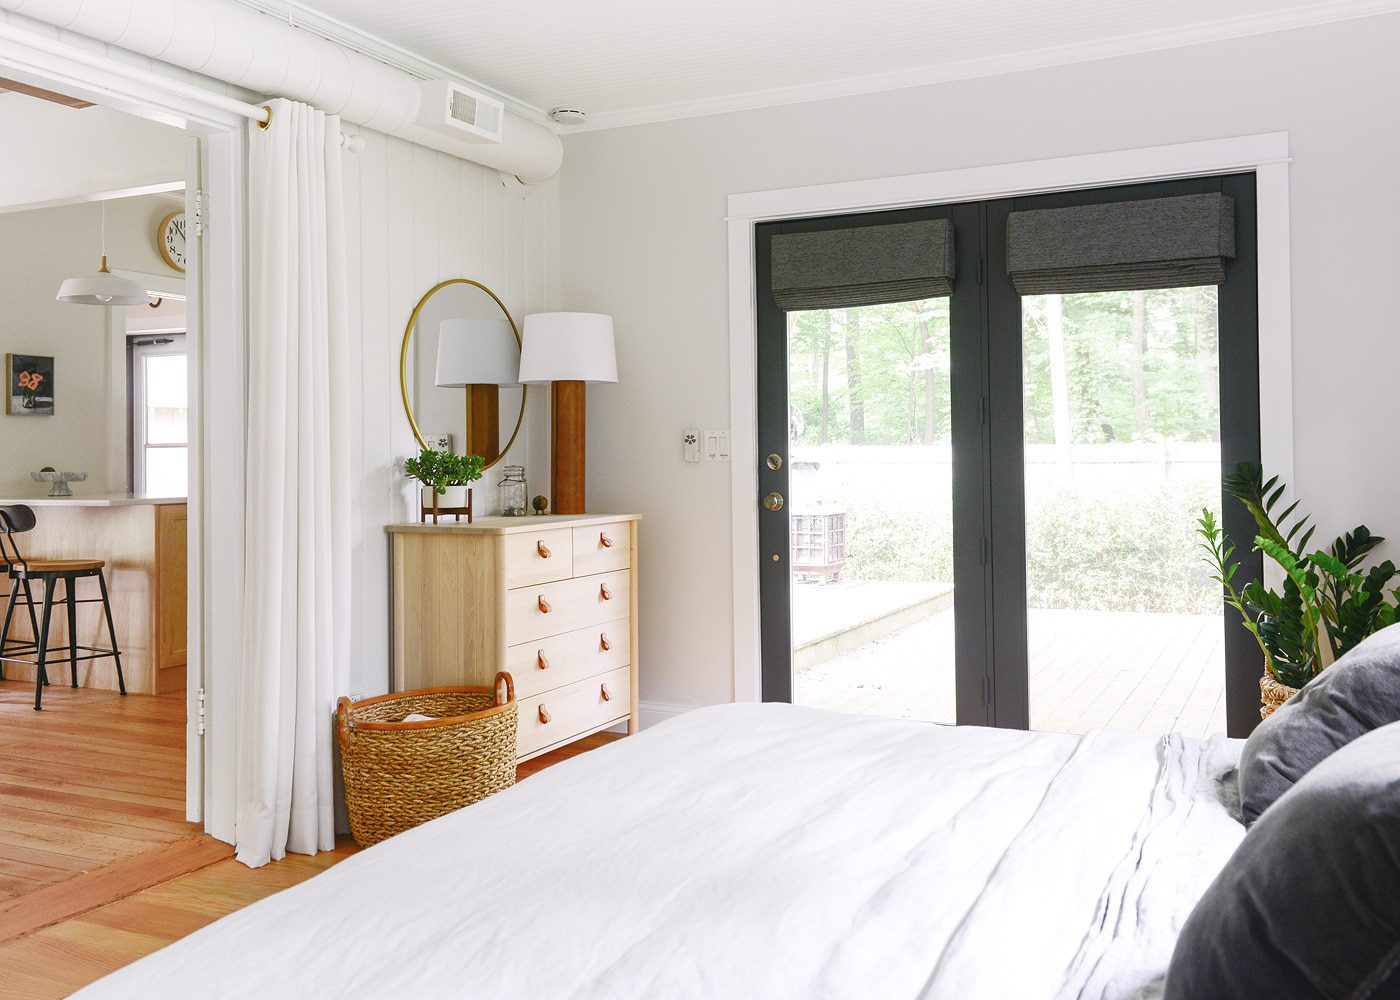 The primary bedroom offers a king size bed and beautiful views of the surrounding forest. 